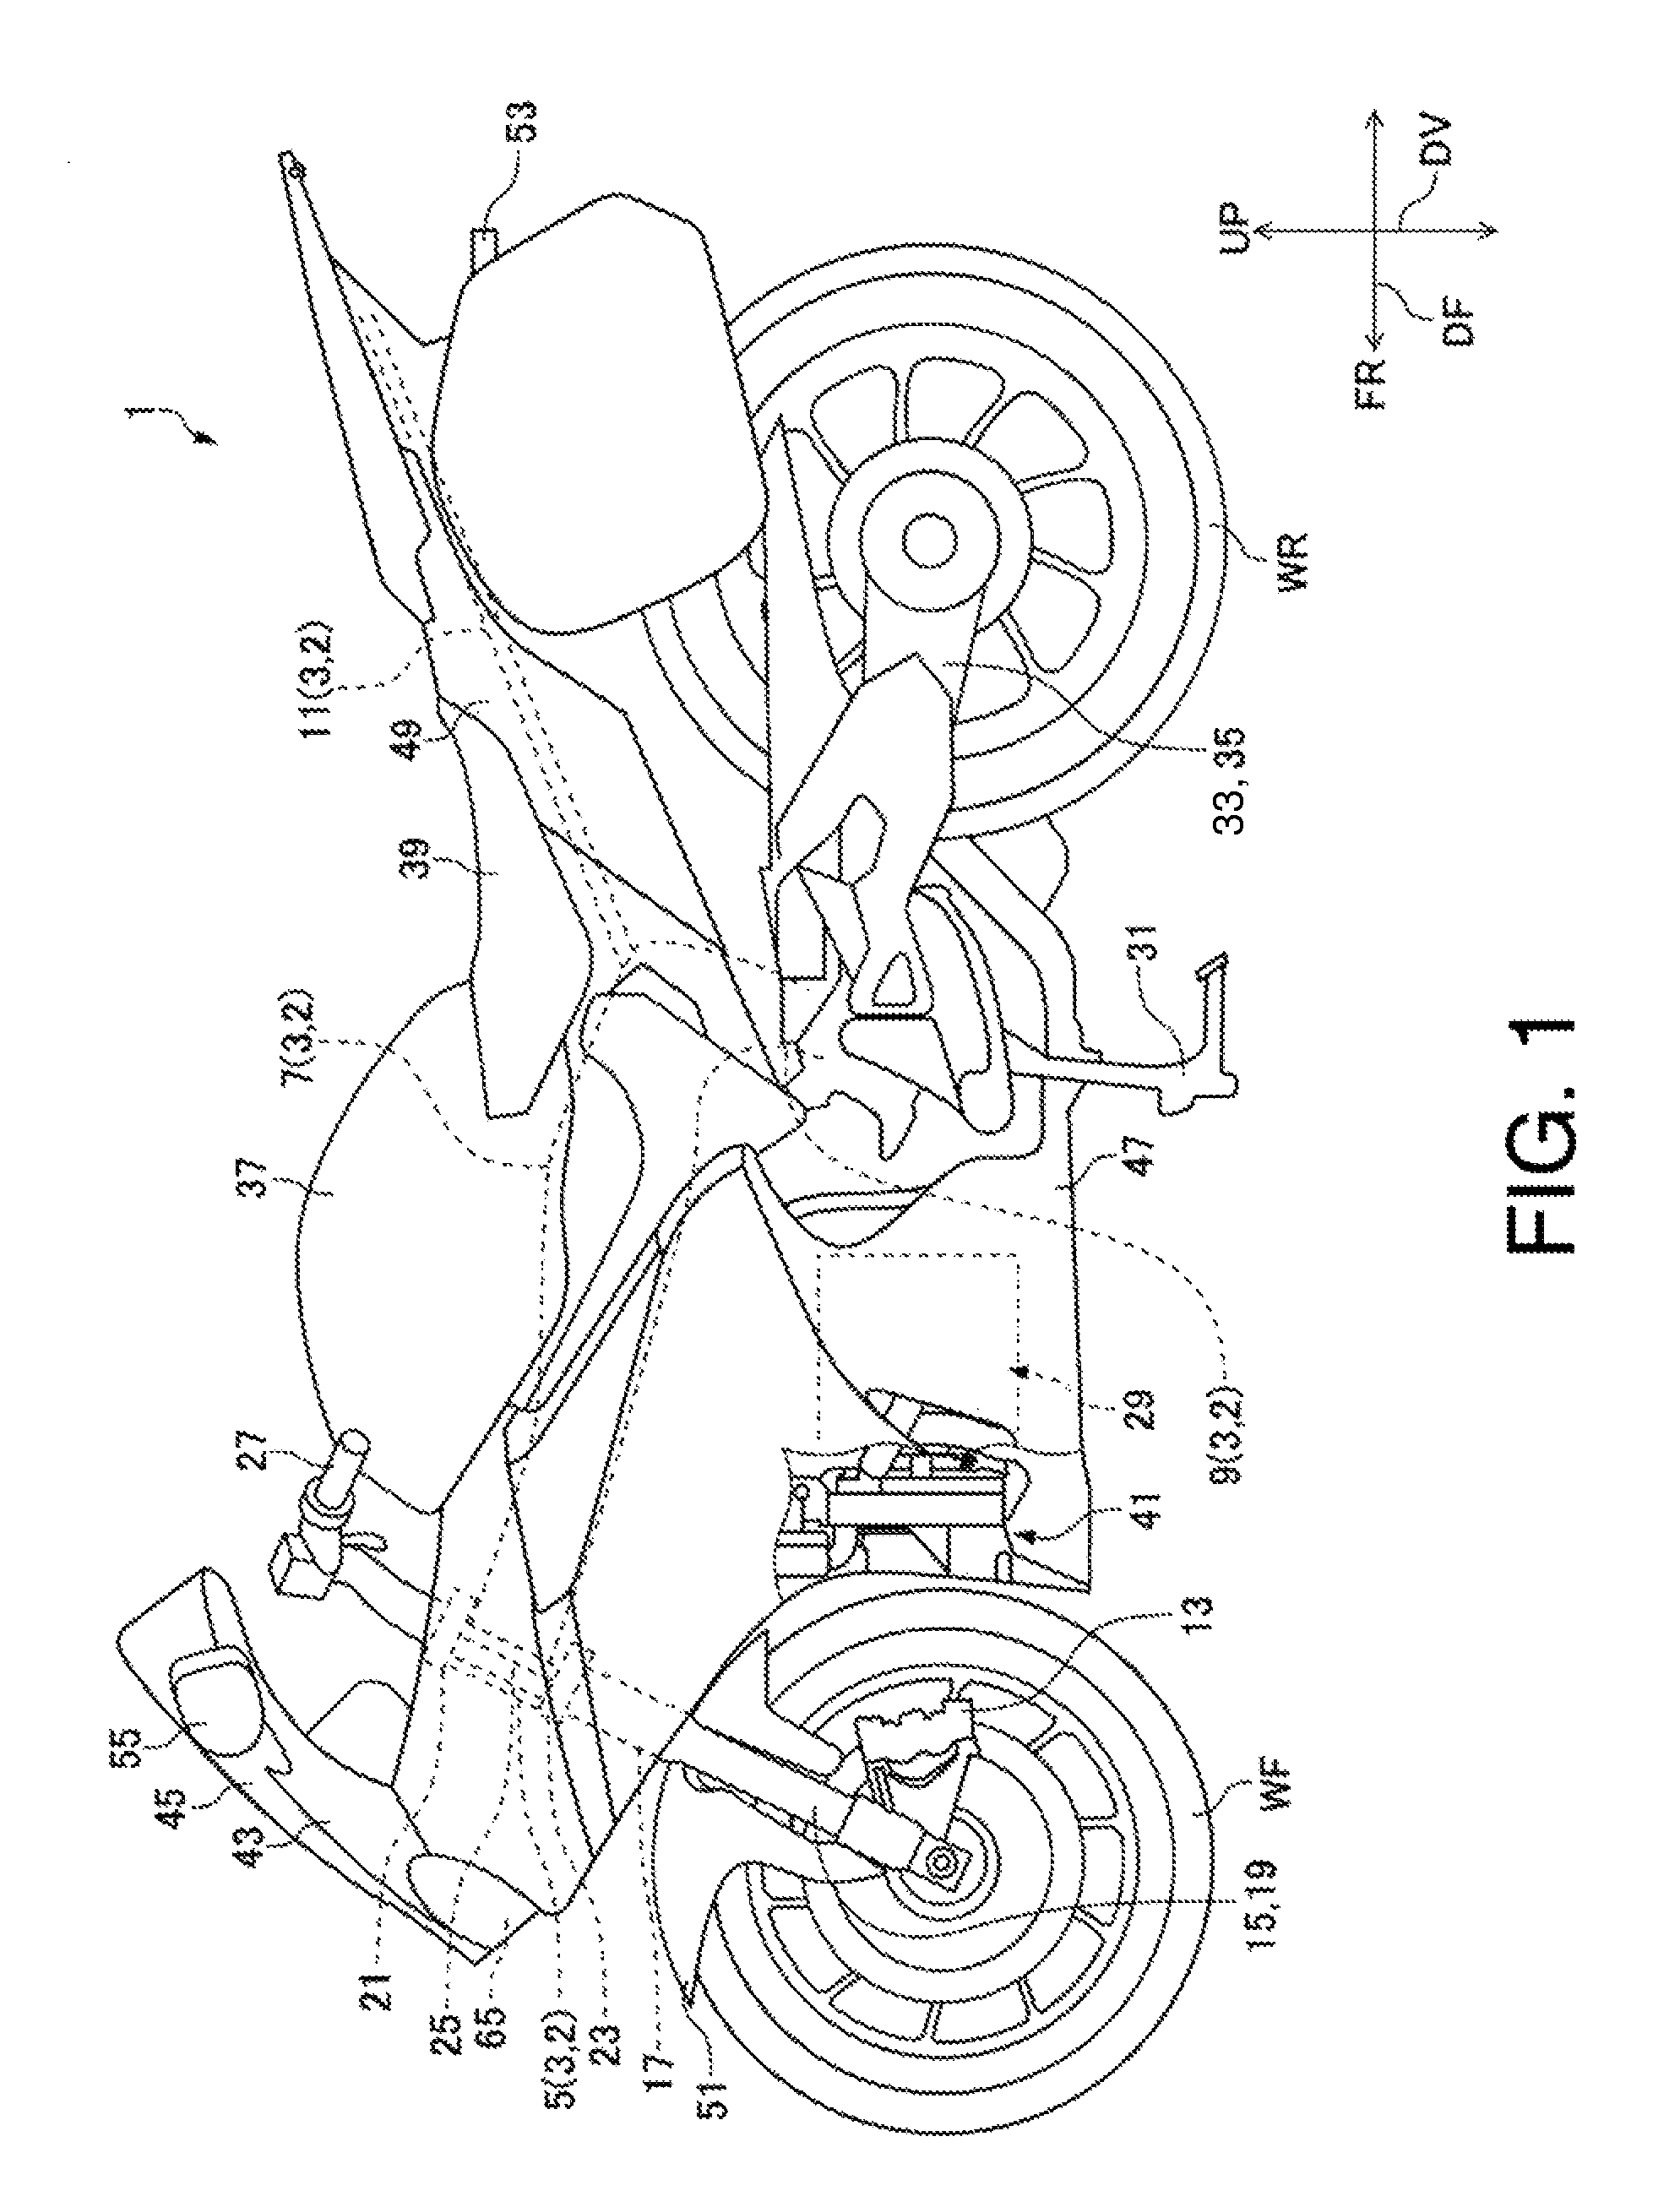 Radiator structure for two-wheeled vehicle